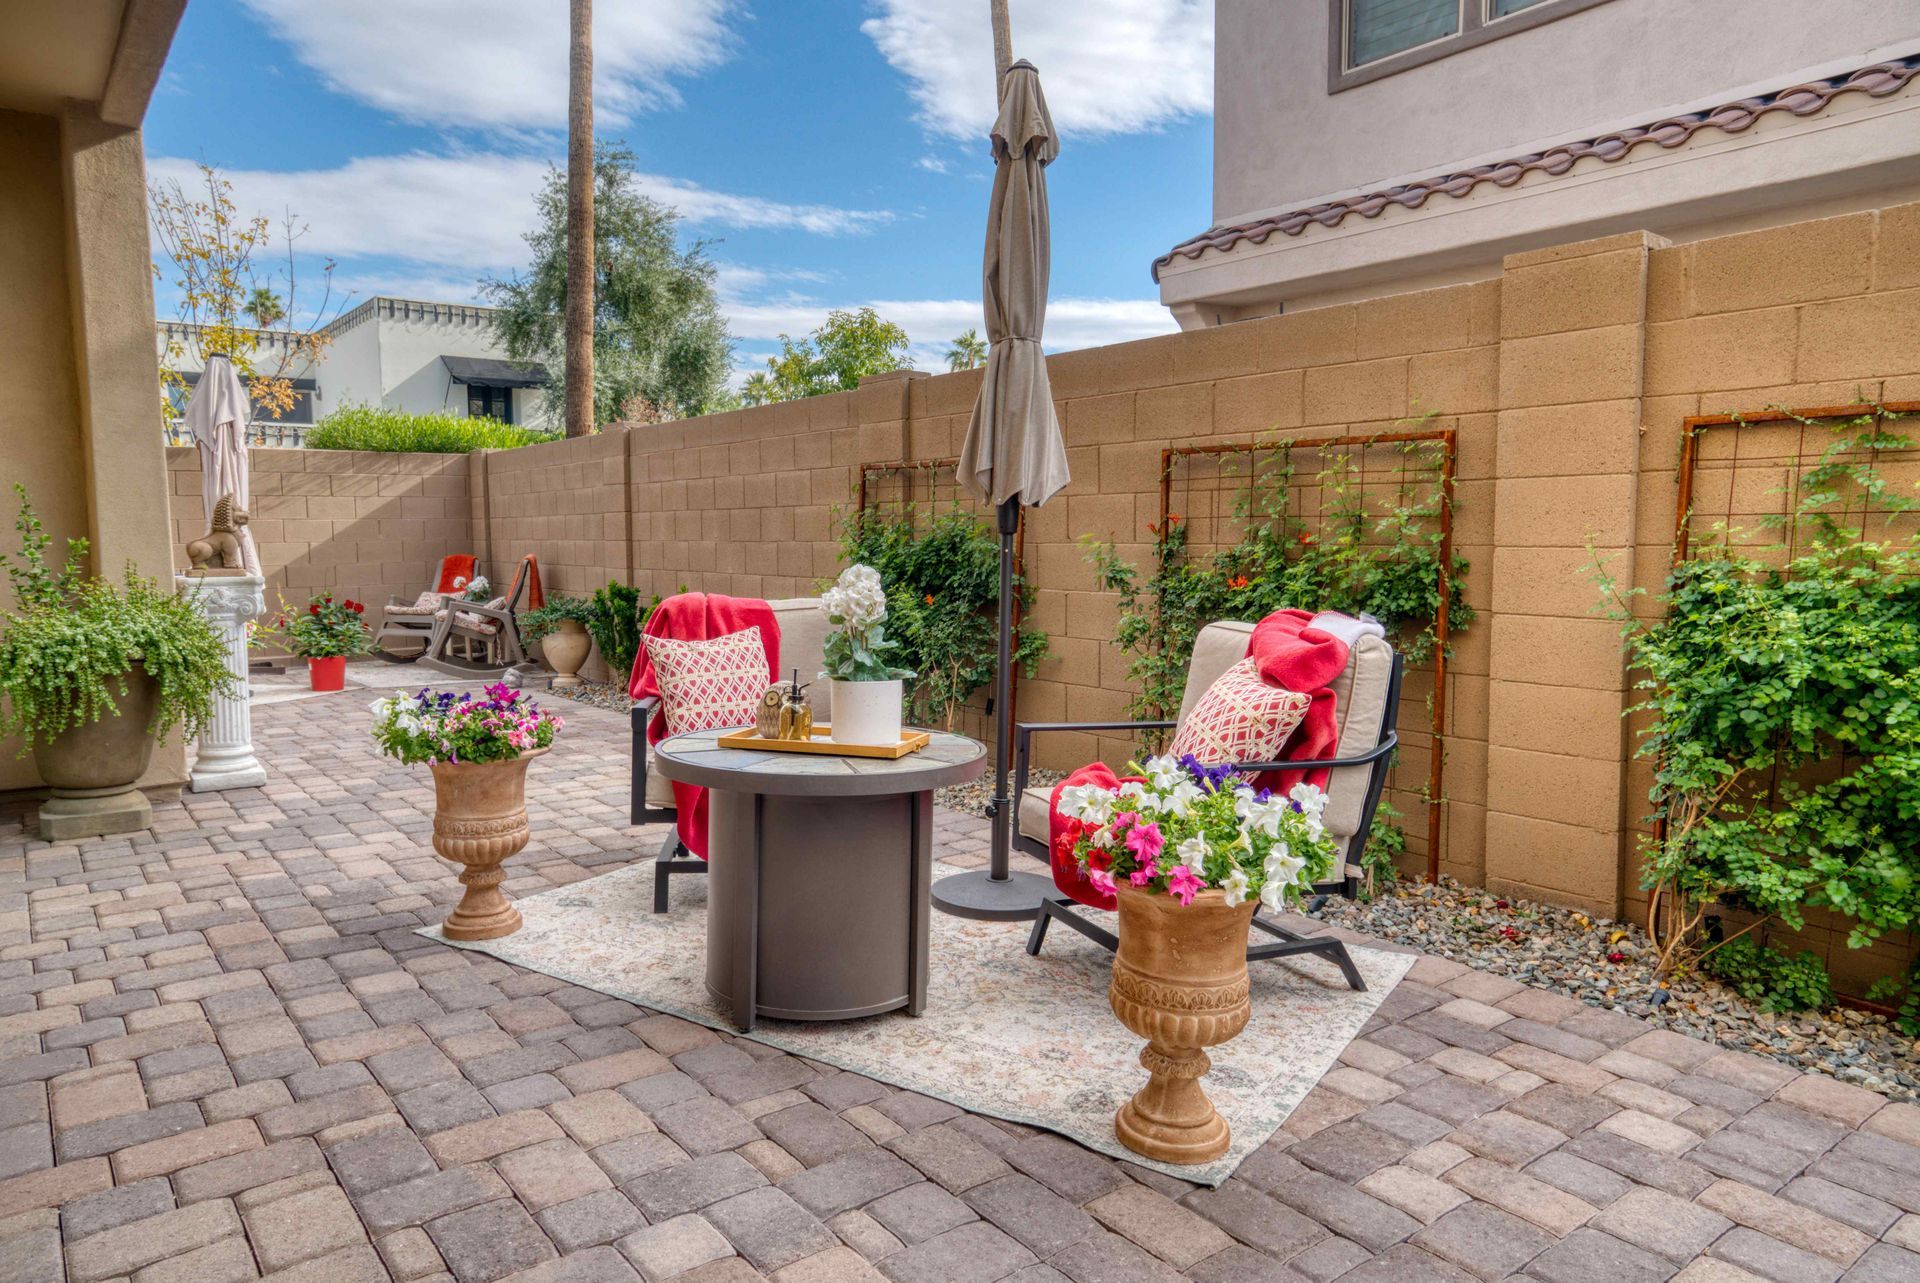 An outdoor seating area built on a paver patio